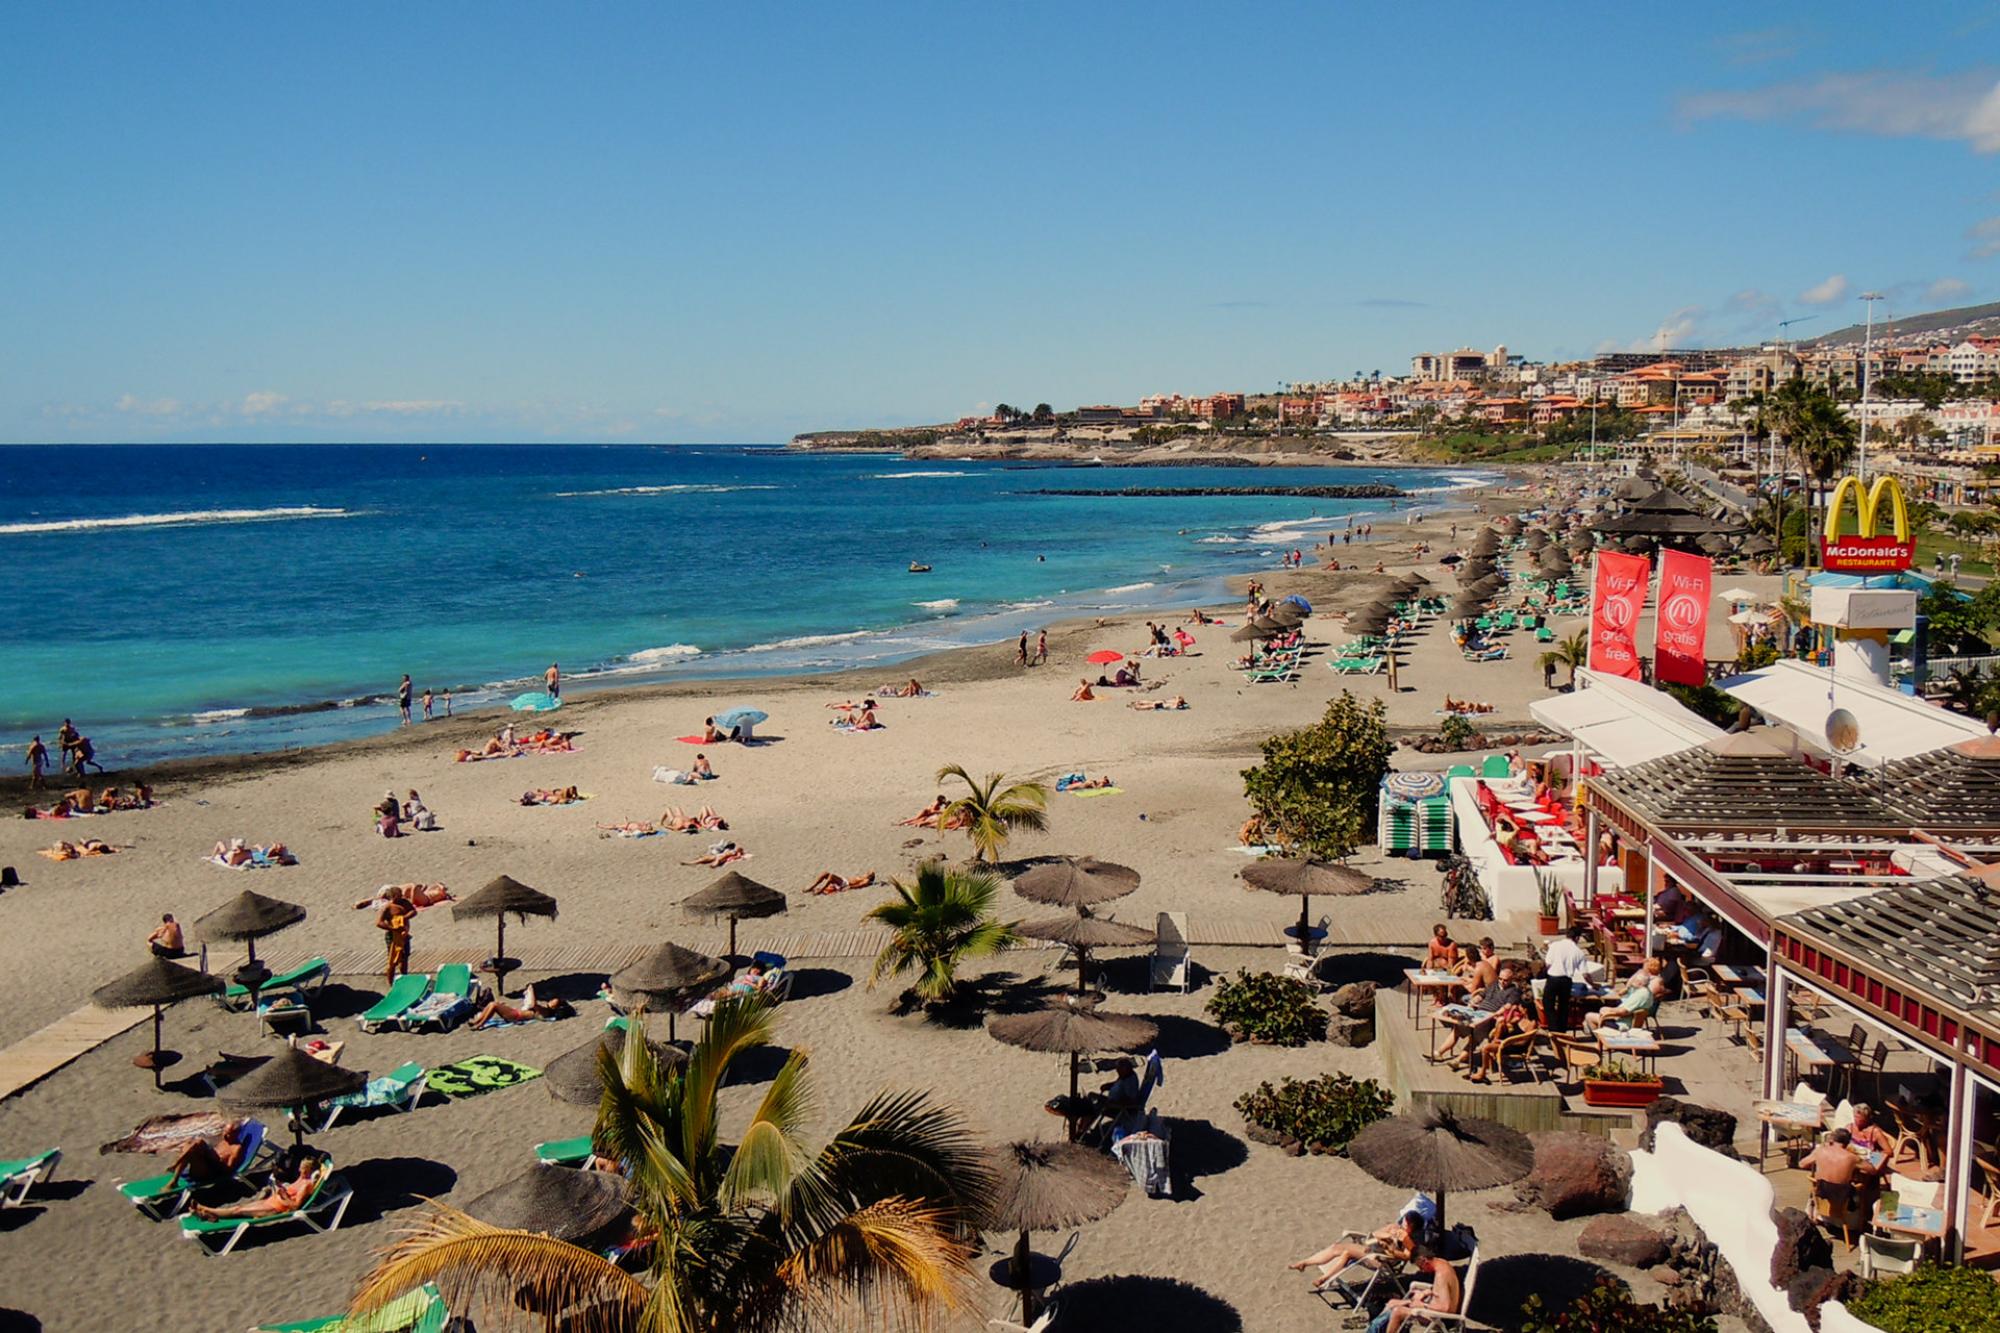 The Cleopatra Palace Hotel's impressive Playa de Las Americas beach situated in vibrant Tenerife.